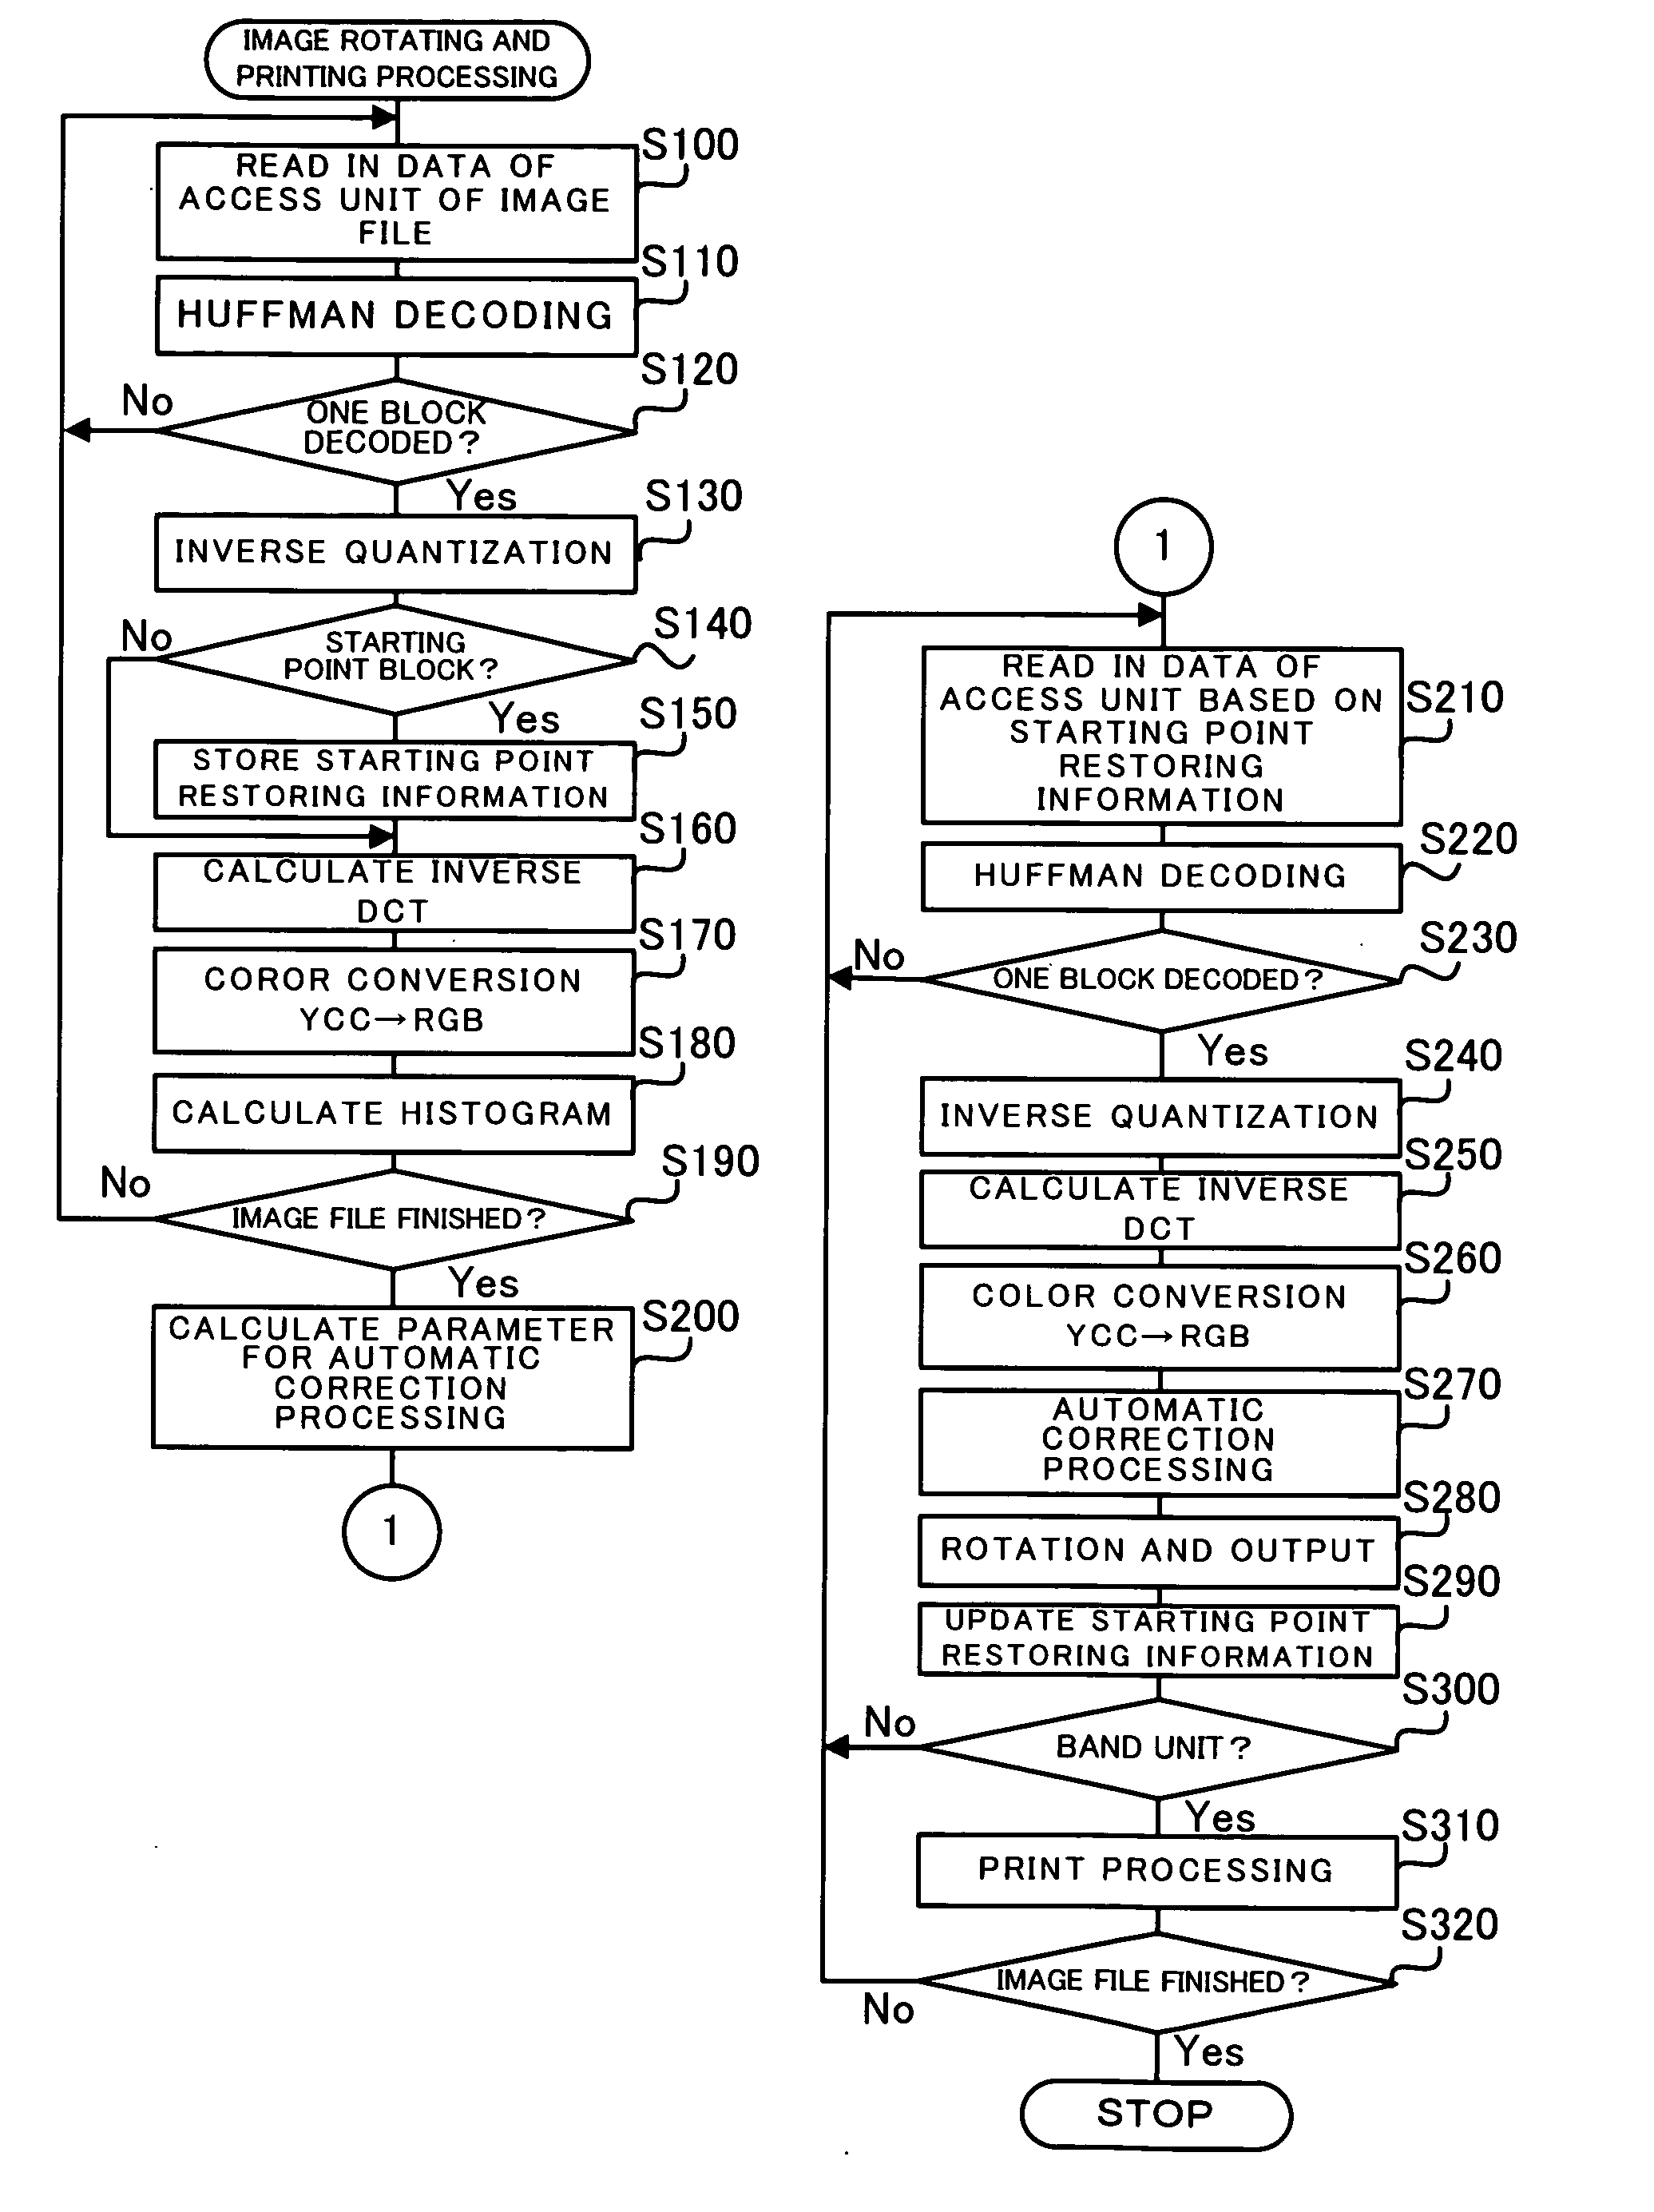 Image processing apparatus, printer and control method of the image processing